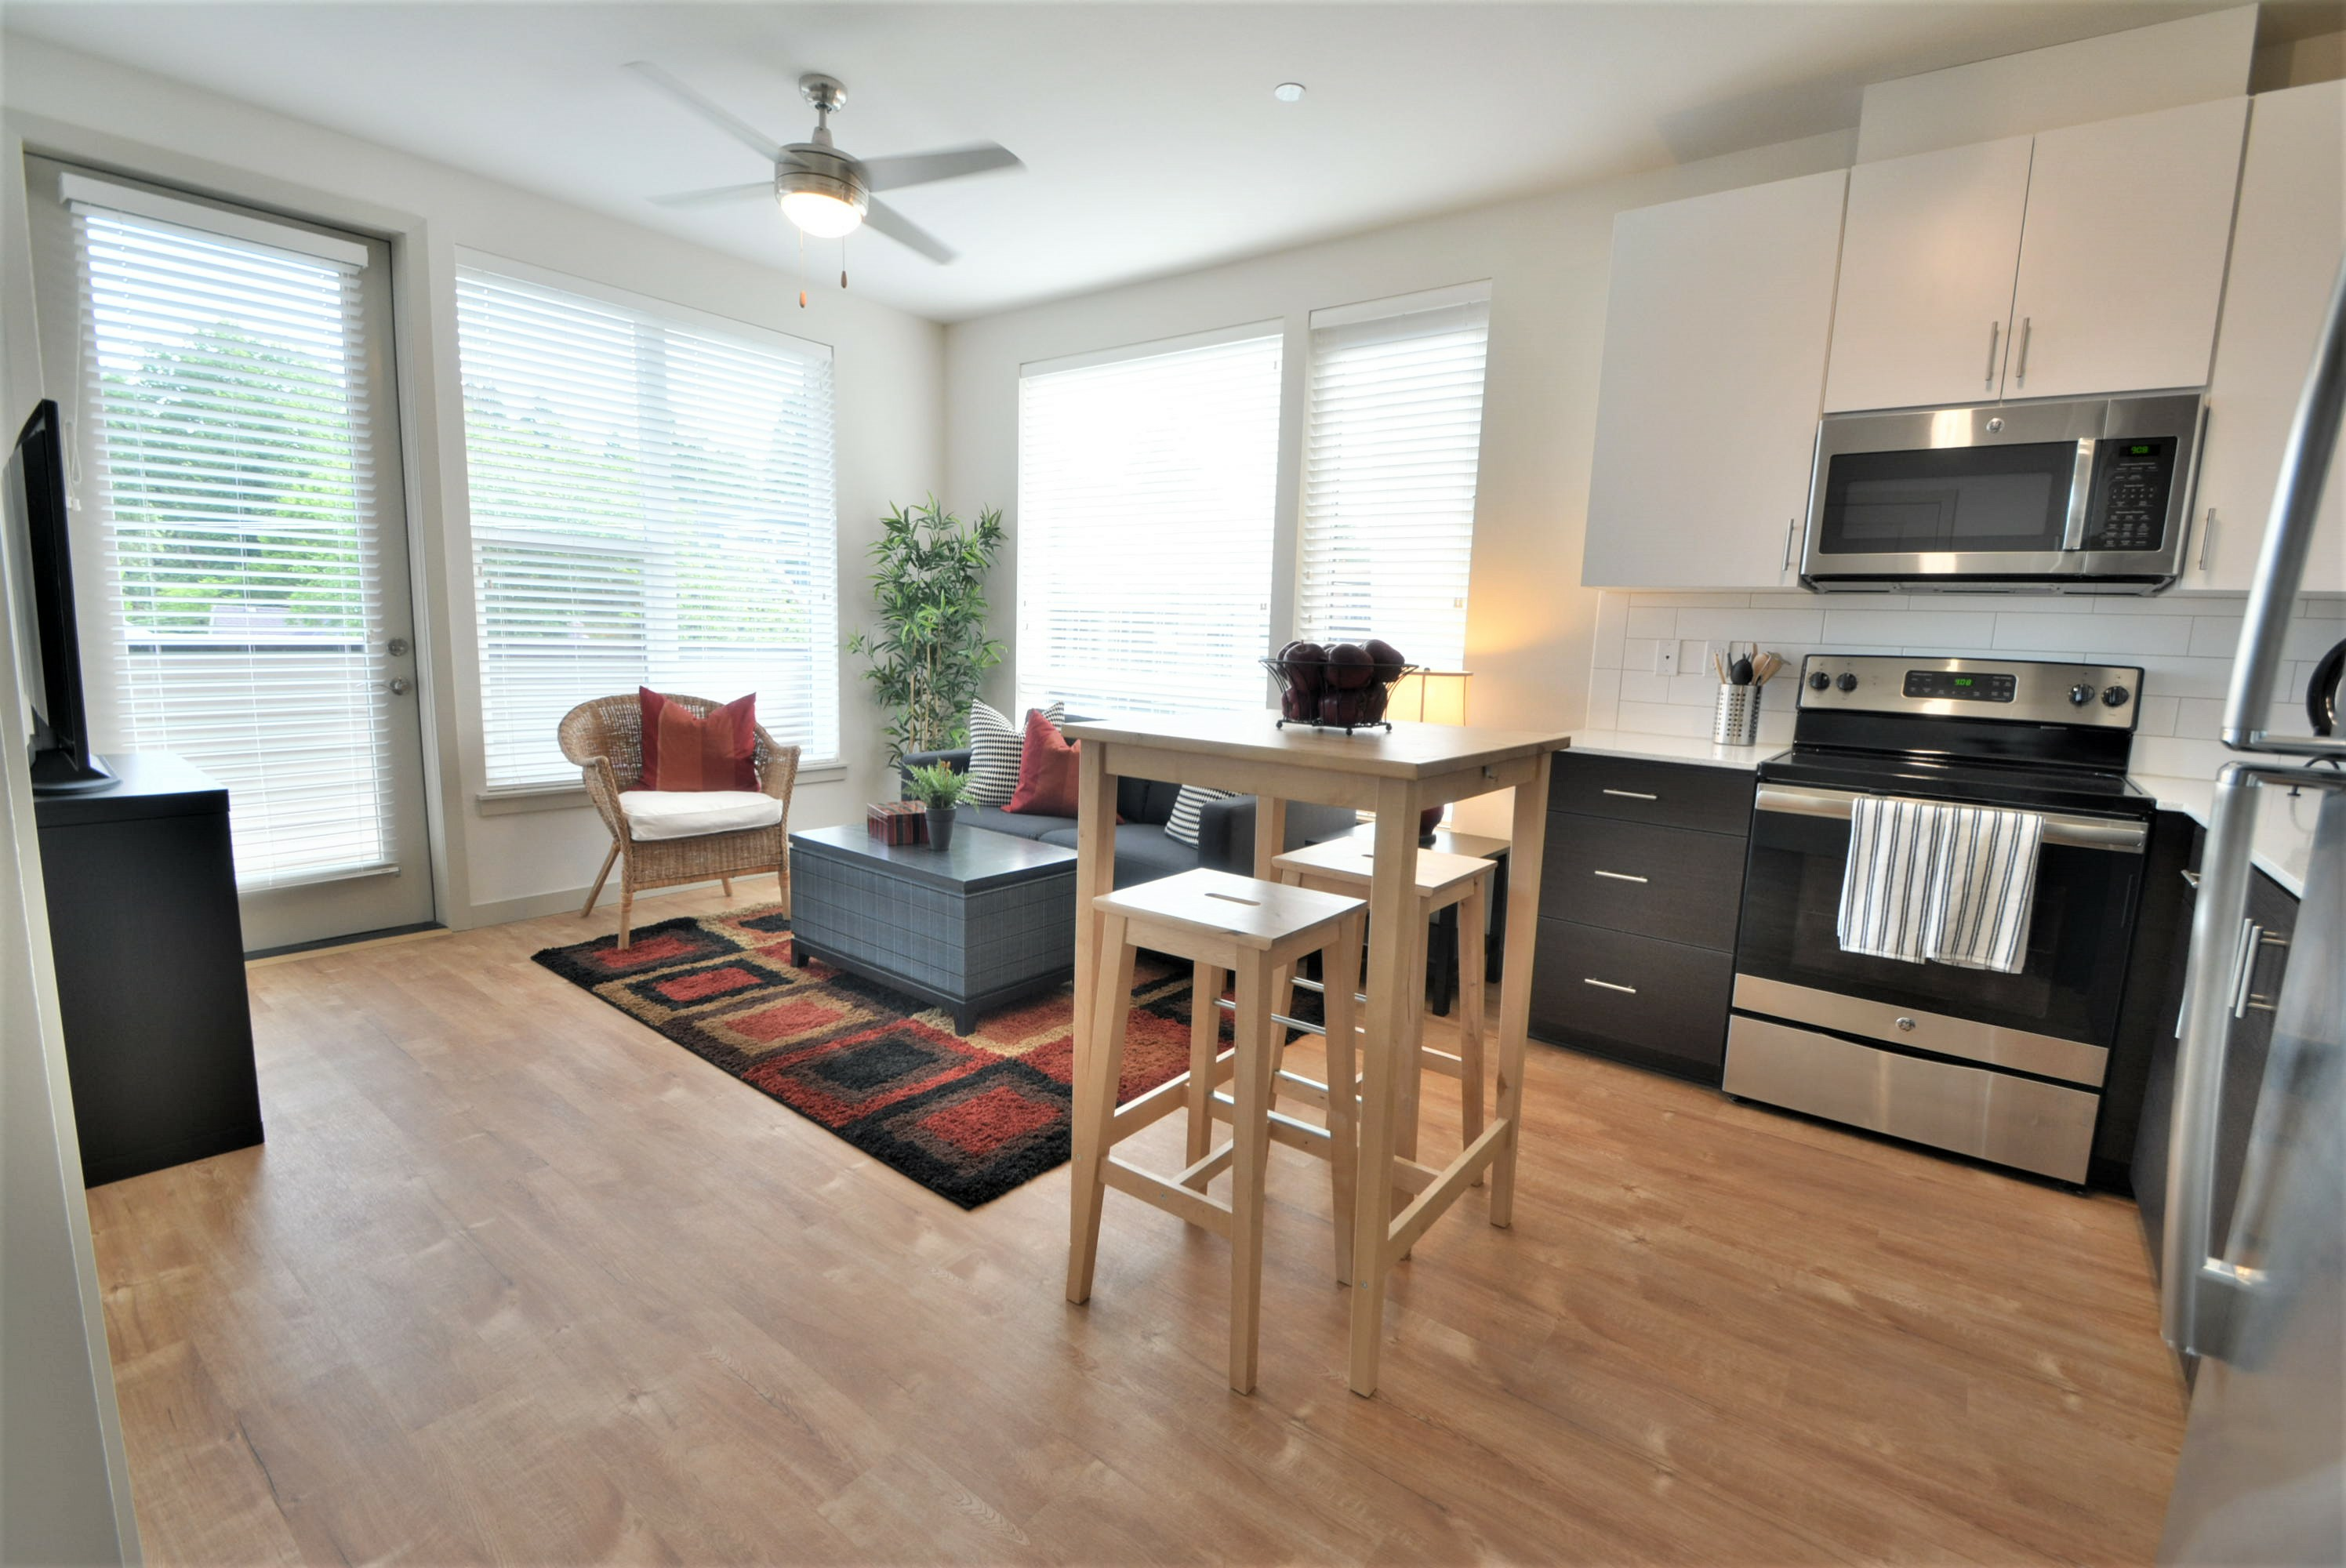 Urbanaire, 1 Bedroom, Galley - Kitchen and Living.JPG